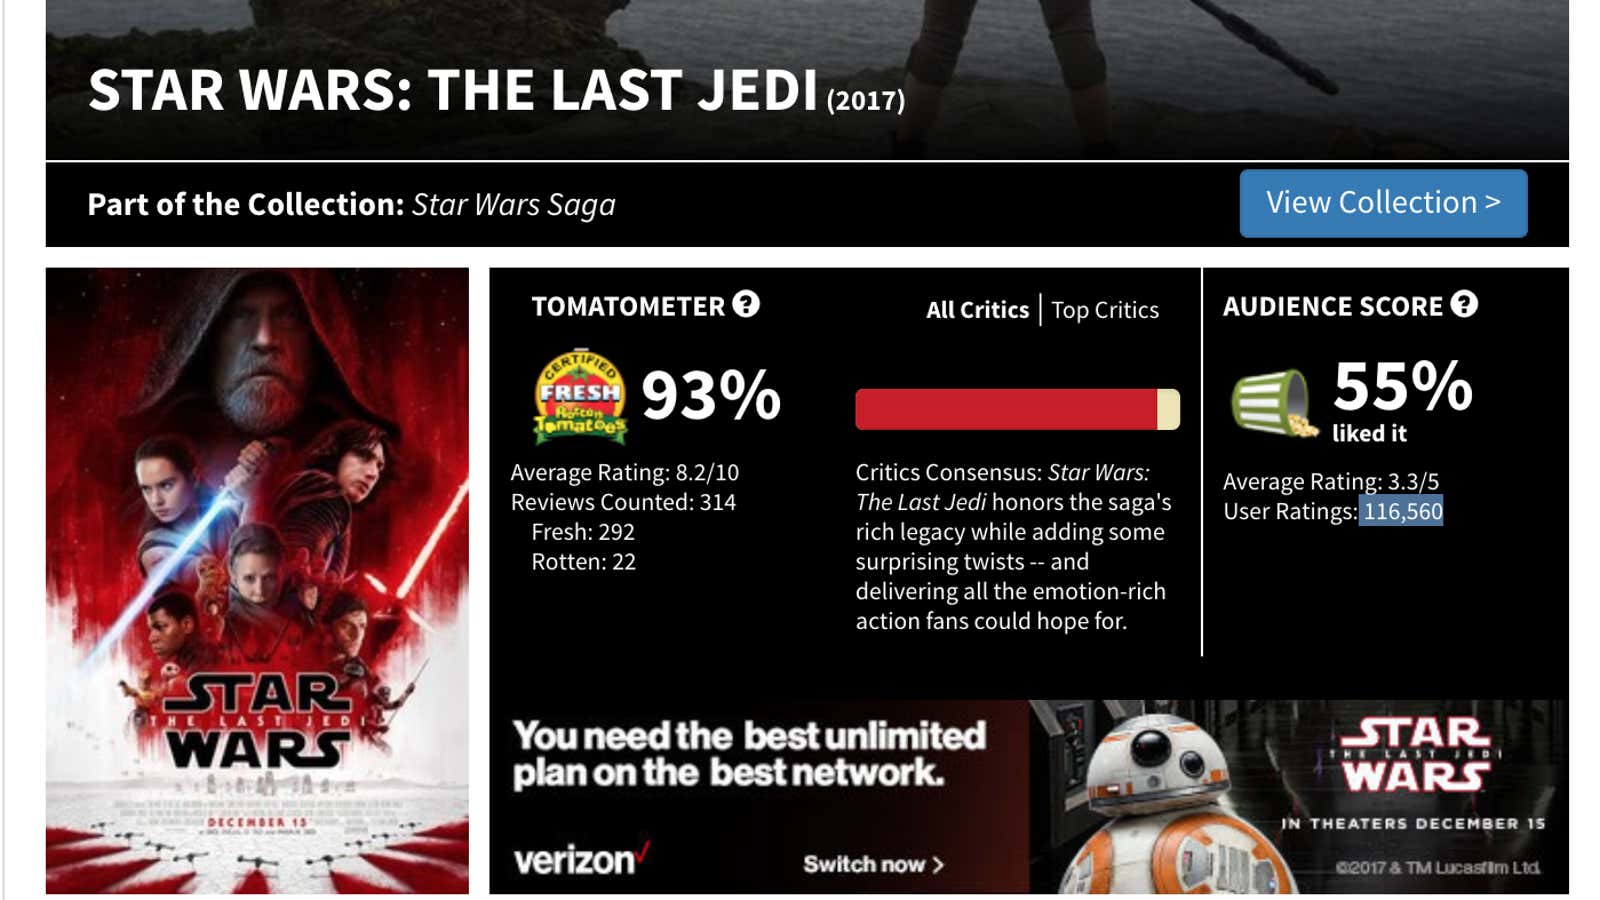 Disgruntled viewers are review bombing “Star Wars: The Last Jedi.: